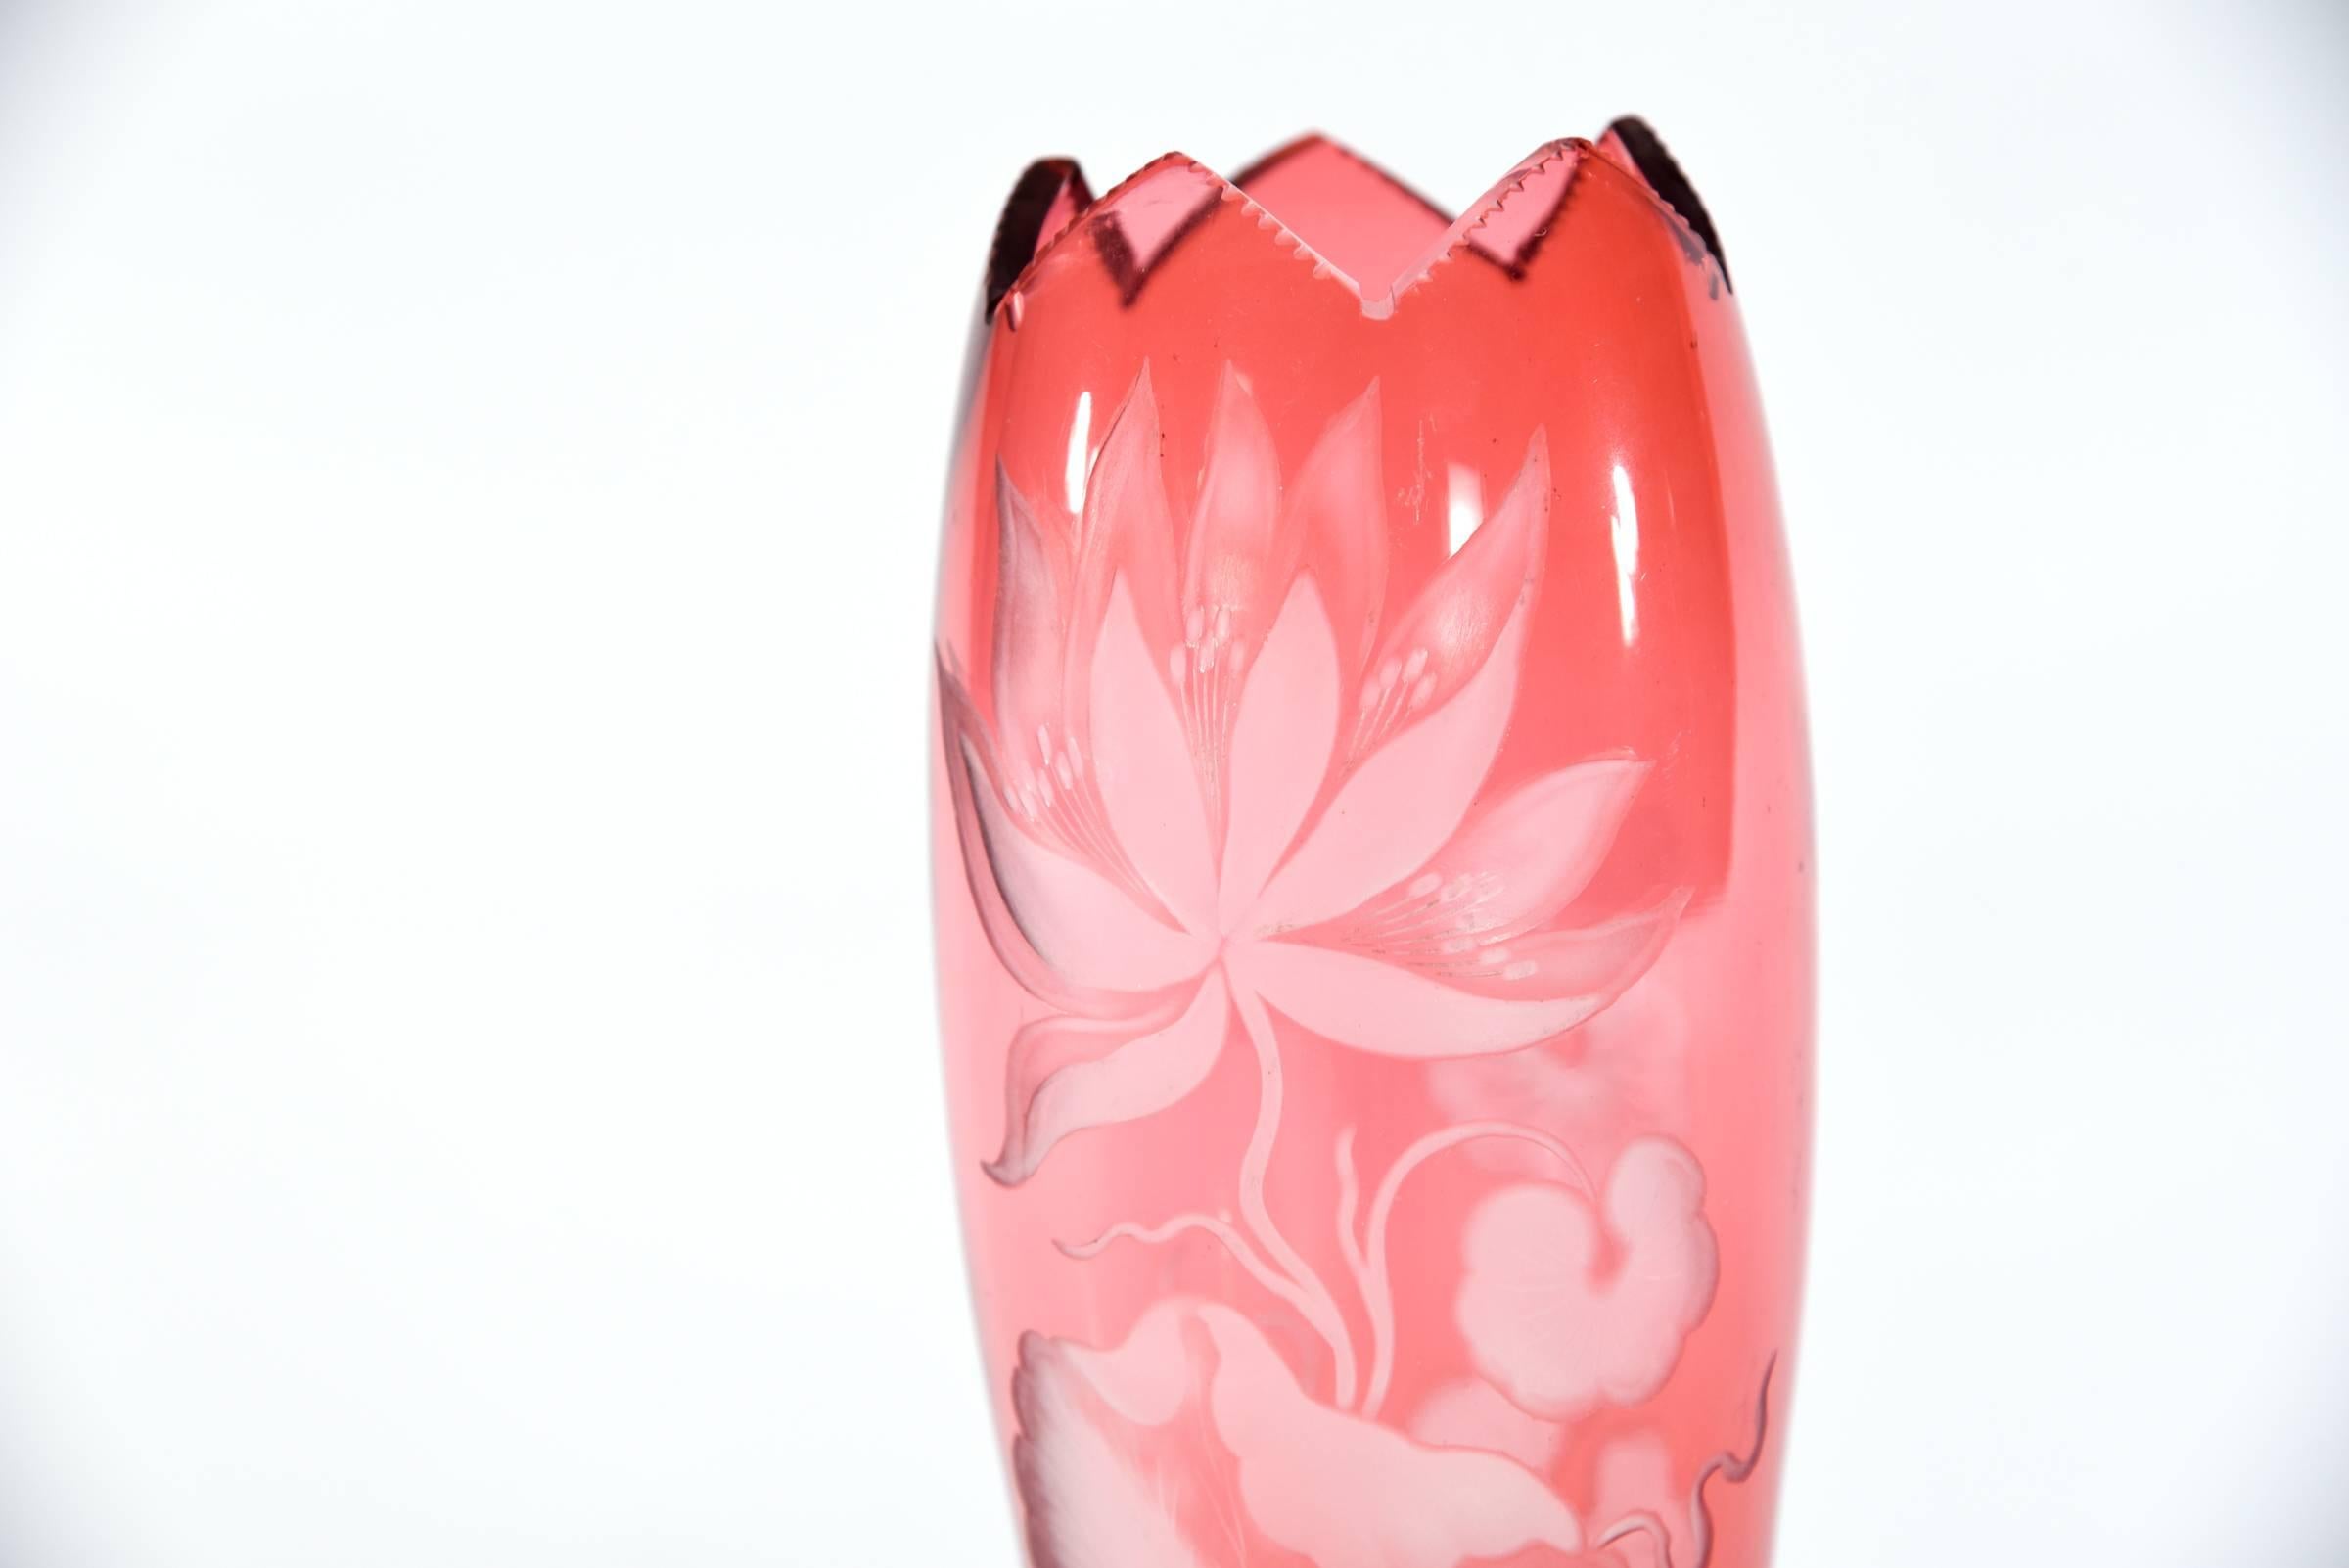 This handblown crystal vase was made by Webb, England and features cranberry overlay, cut to clear in the iconic Art Nouveau water lily motif. The tall and elegant shape is topped off with a six-pointed opening and a star-cut foot. It is decorated